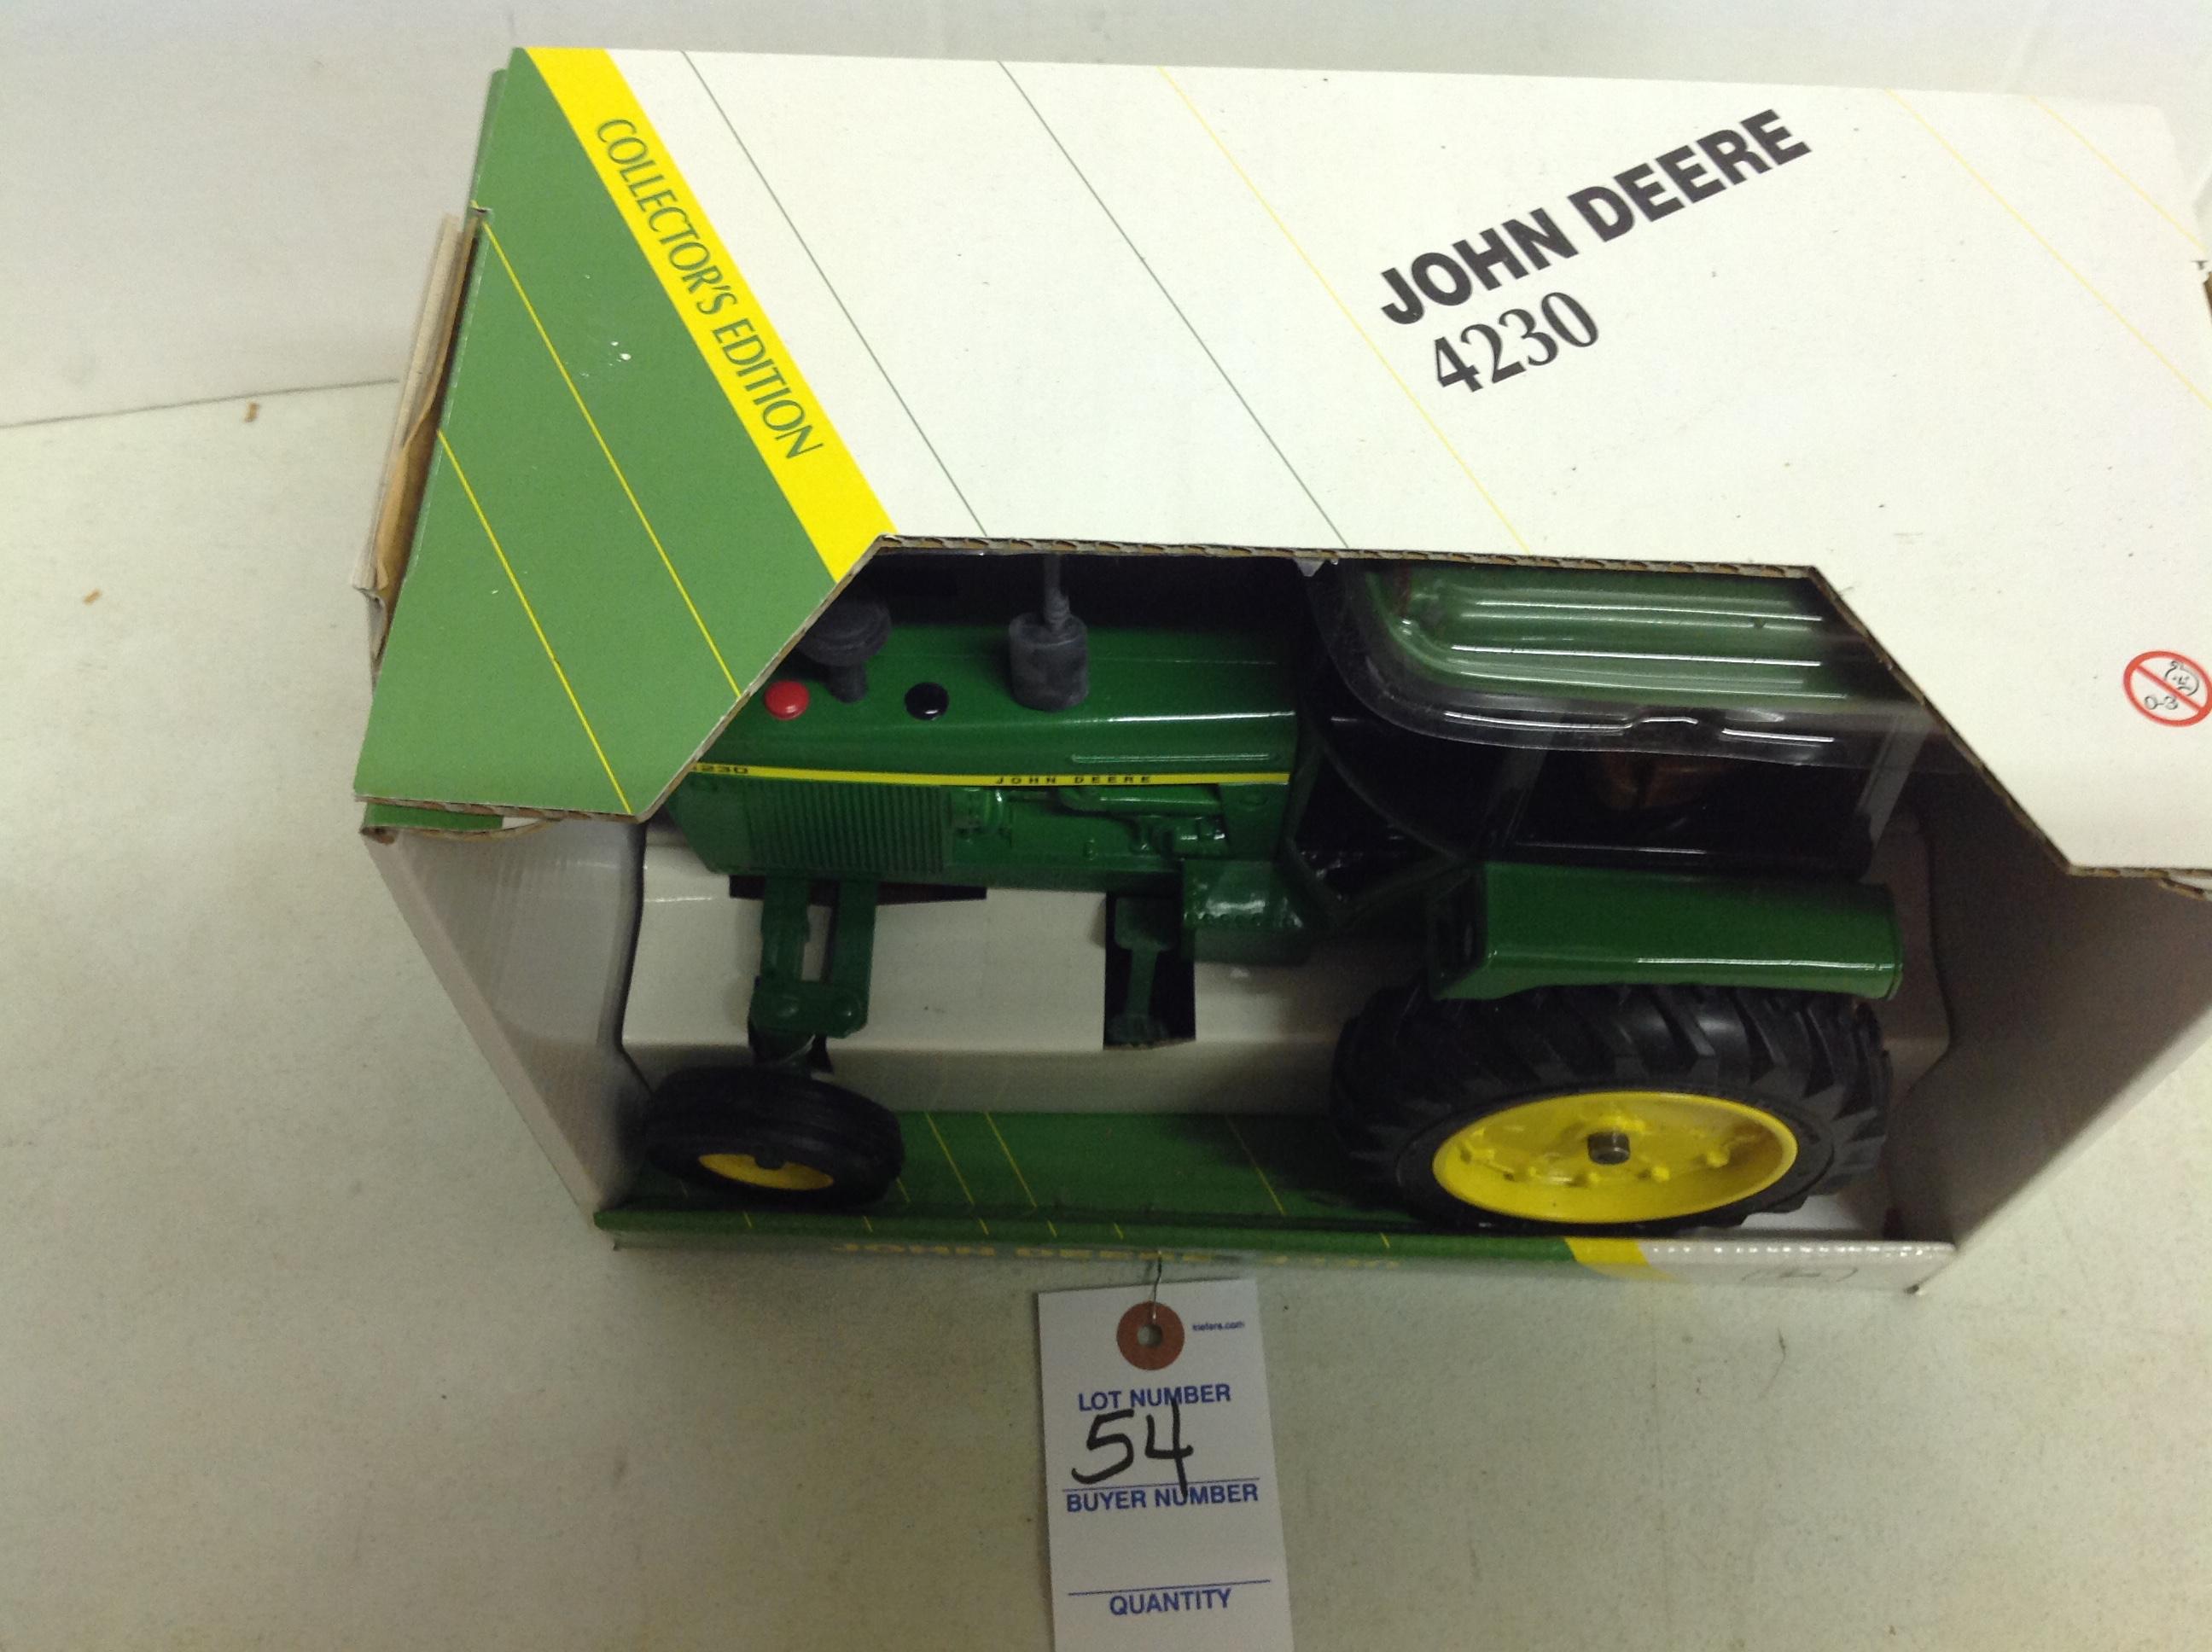 John Deere 4230 Collector Edition, mint condition